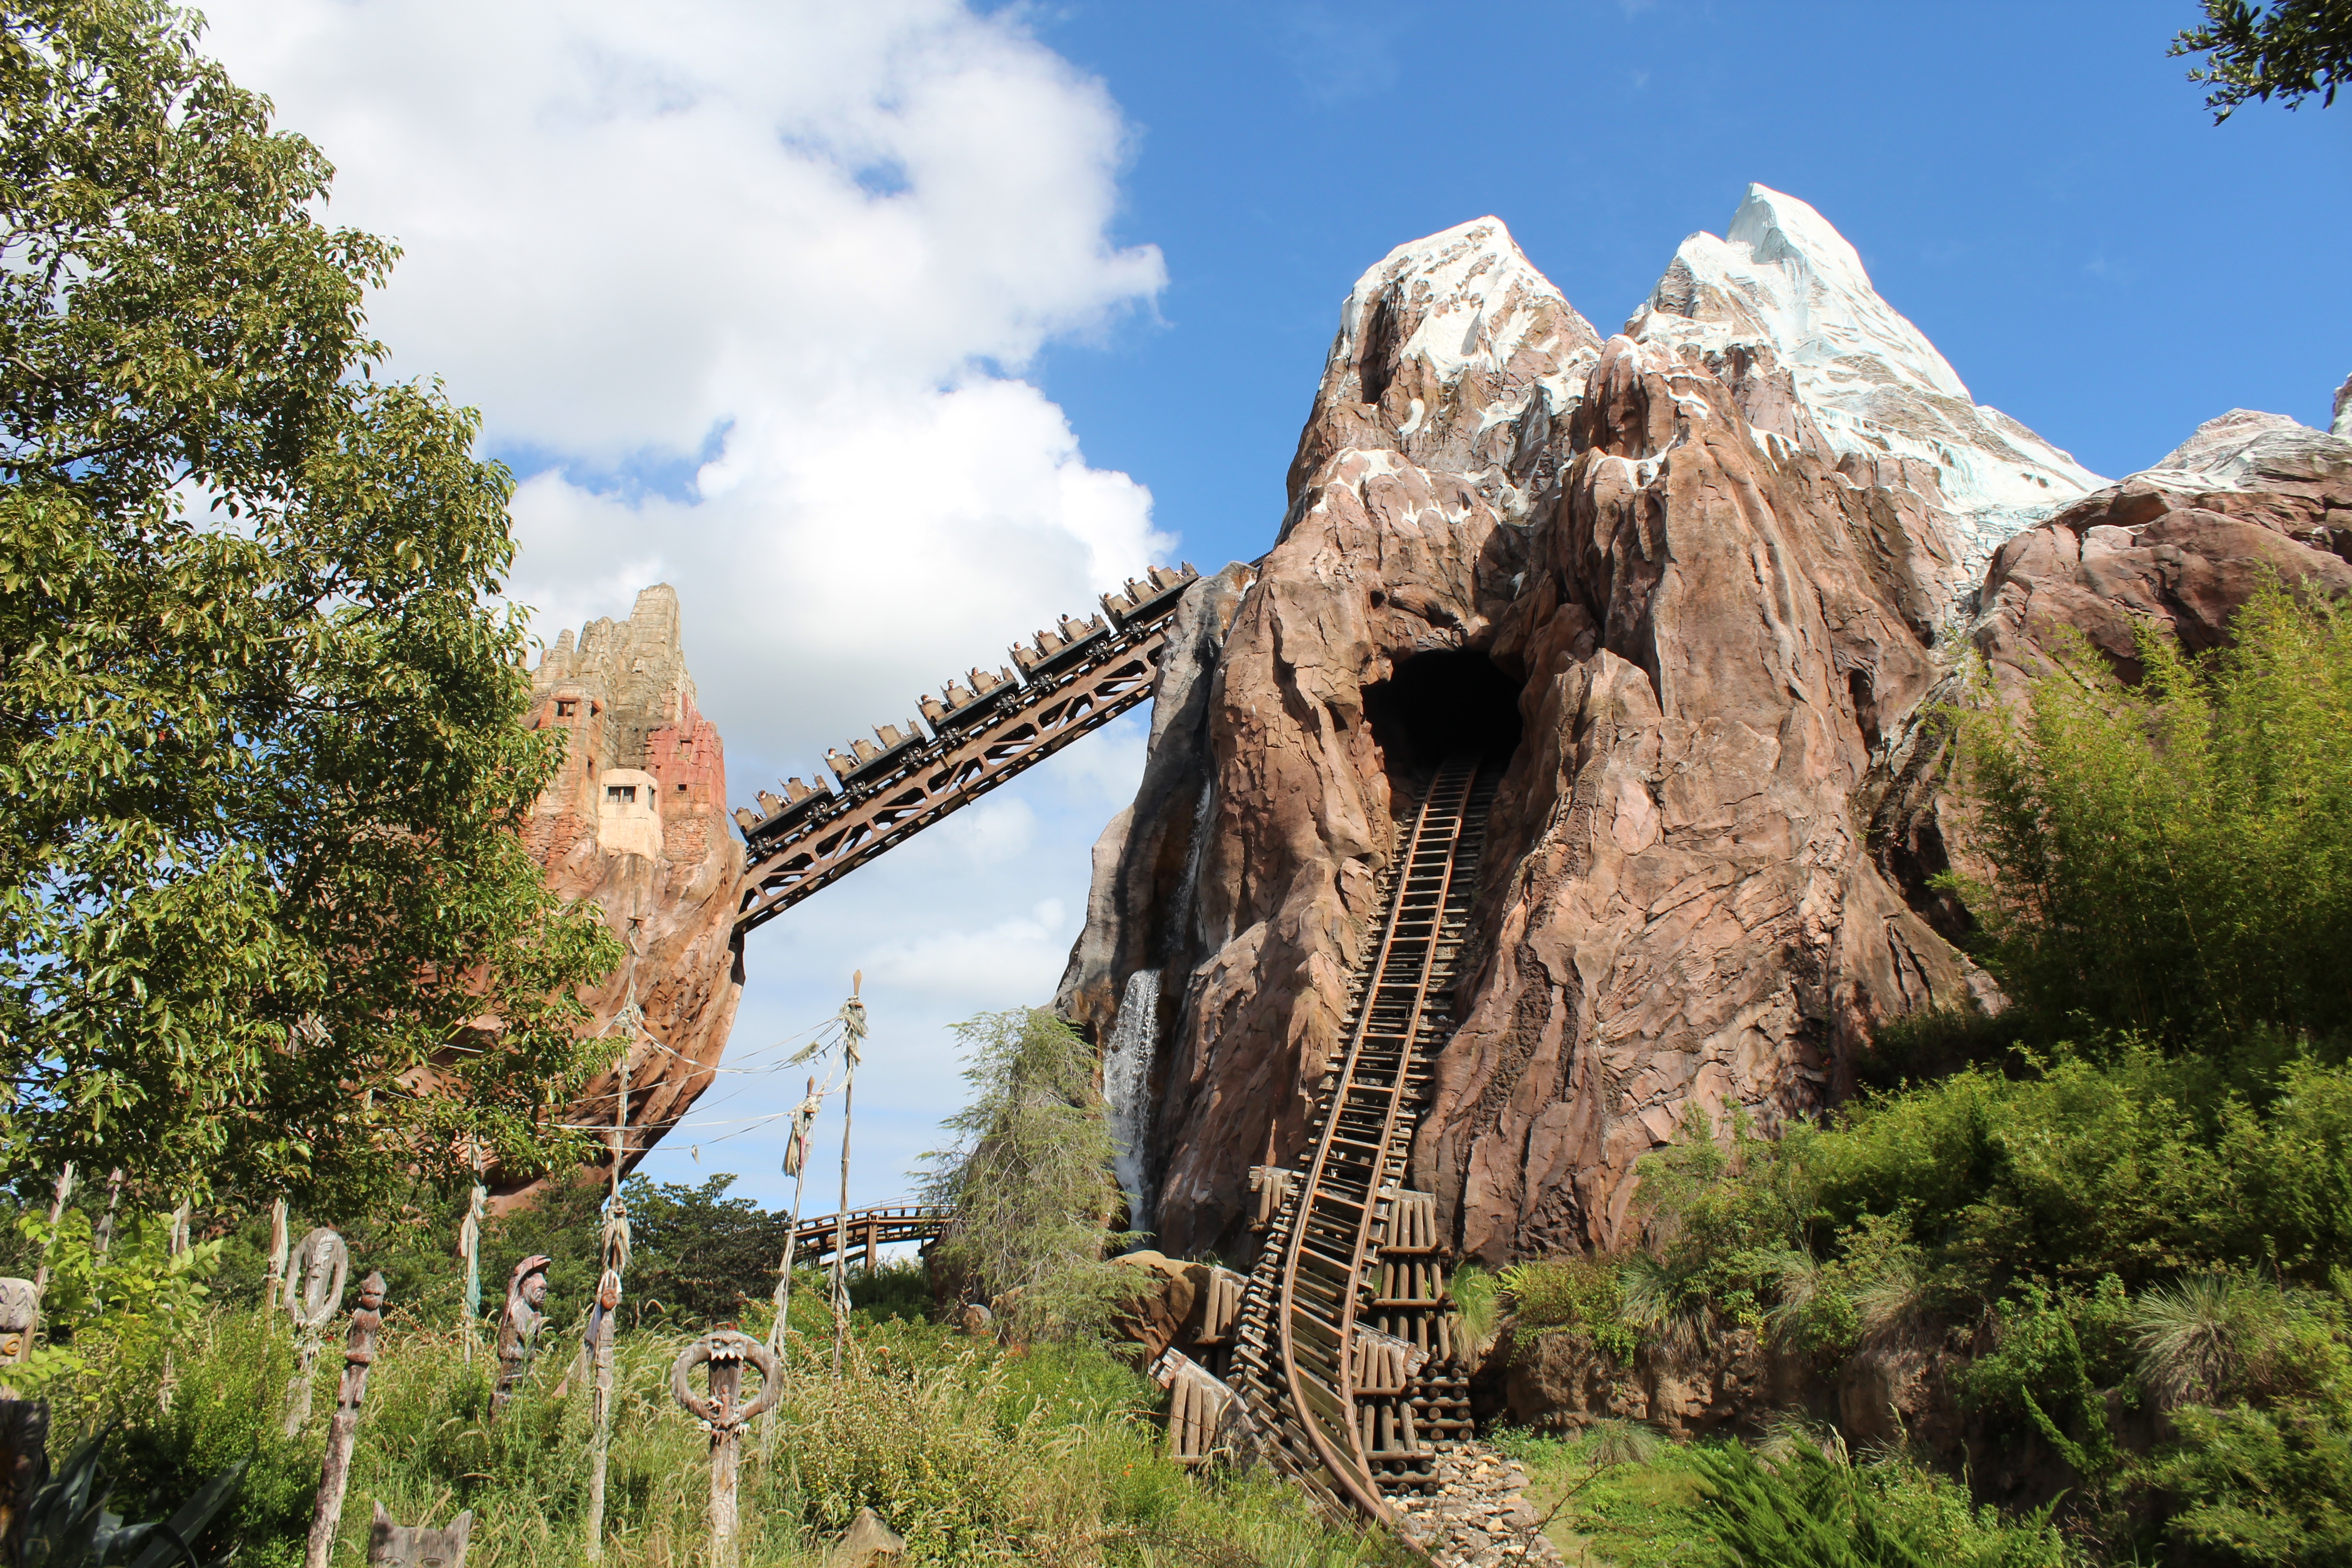 expedition everest